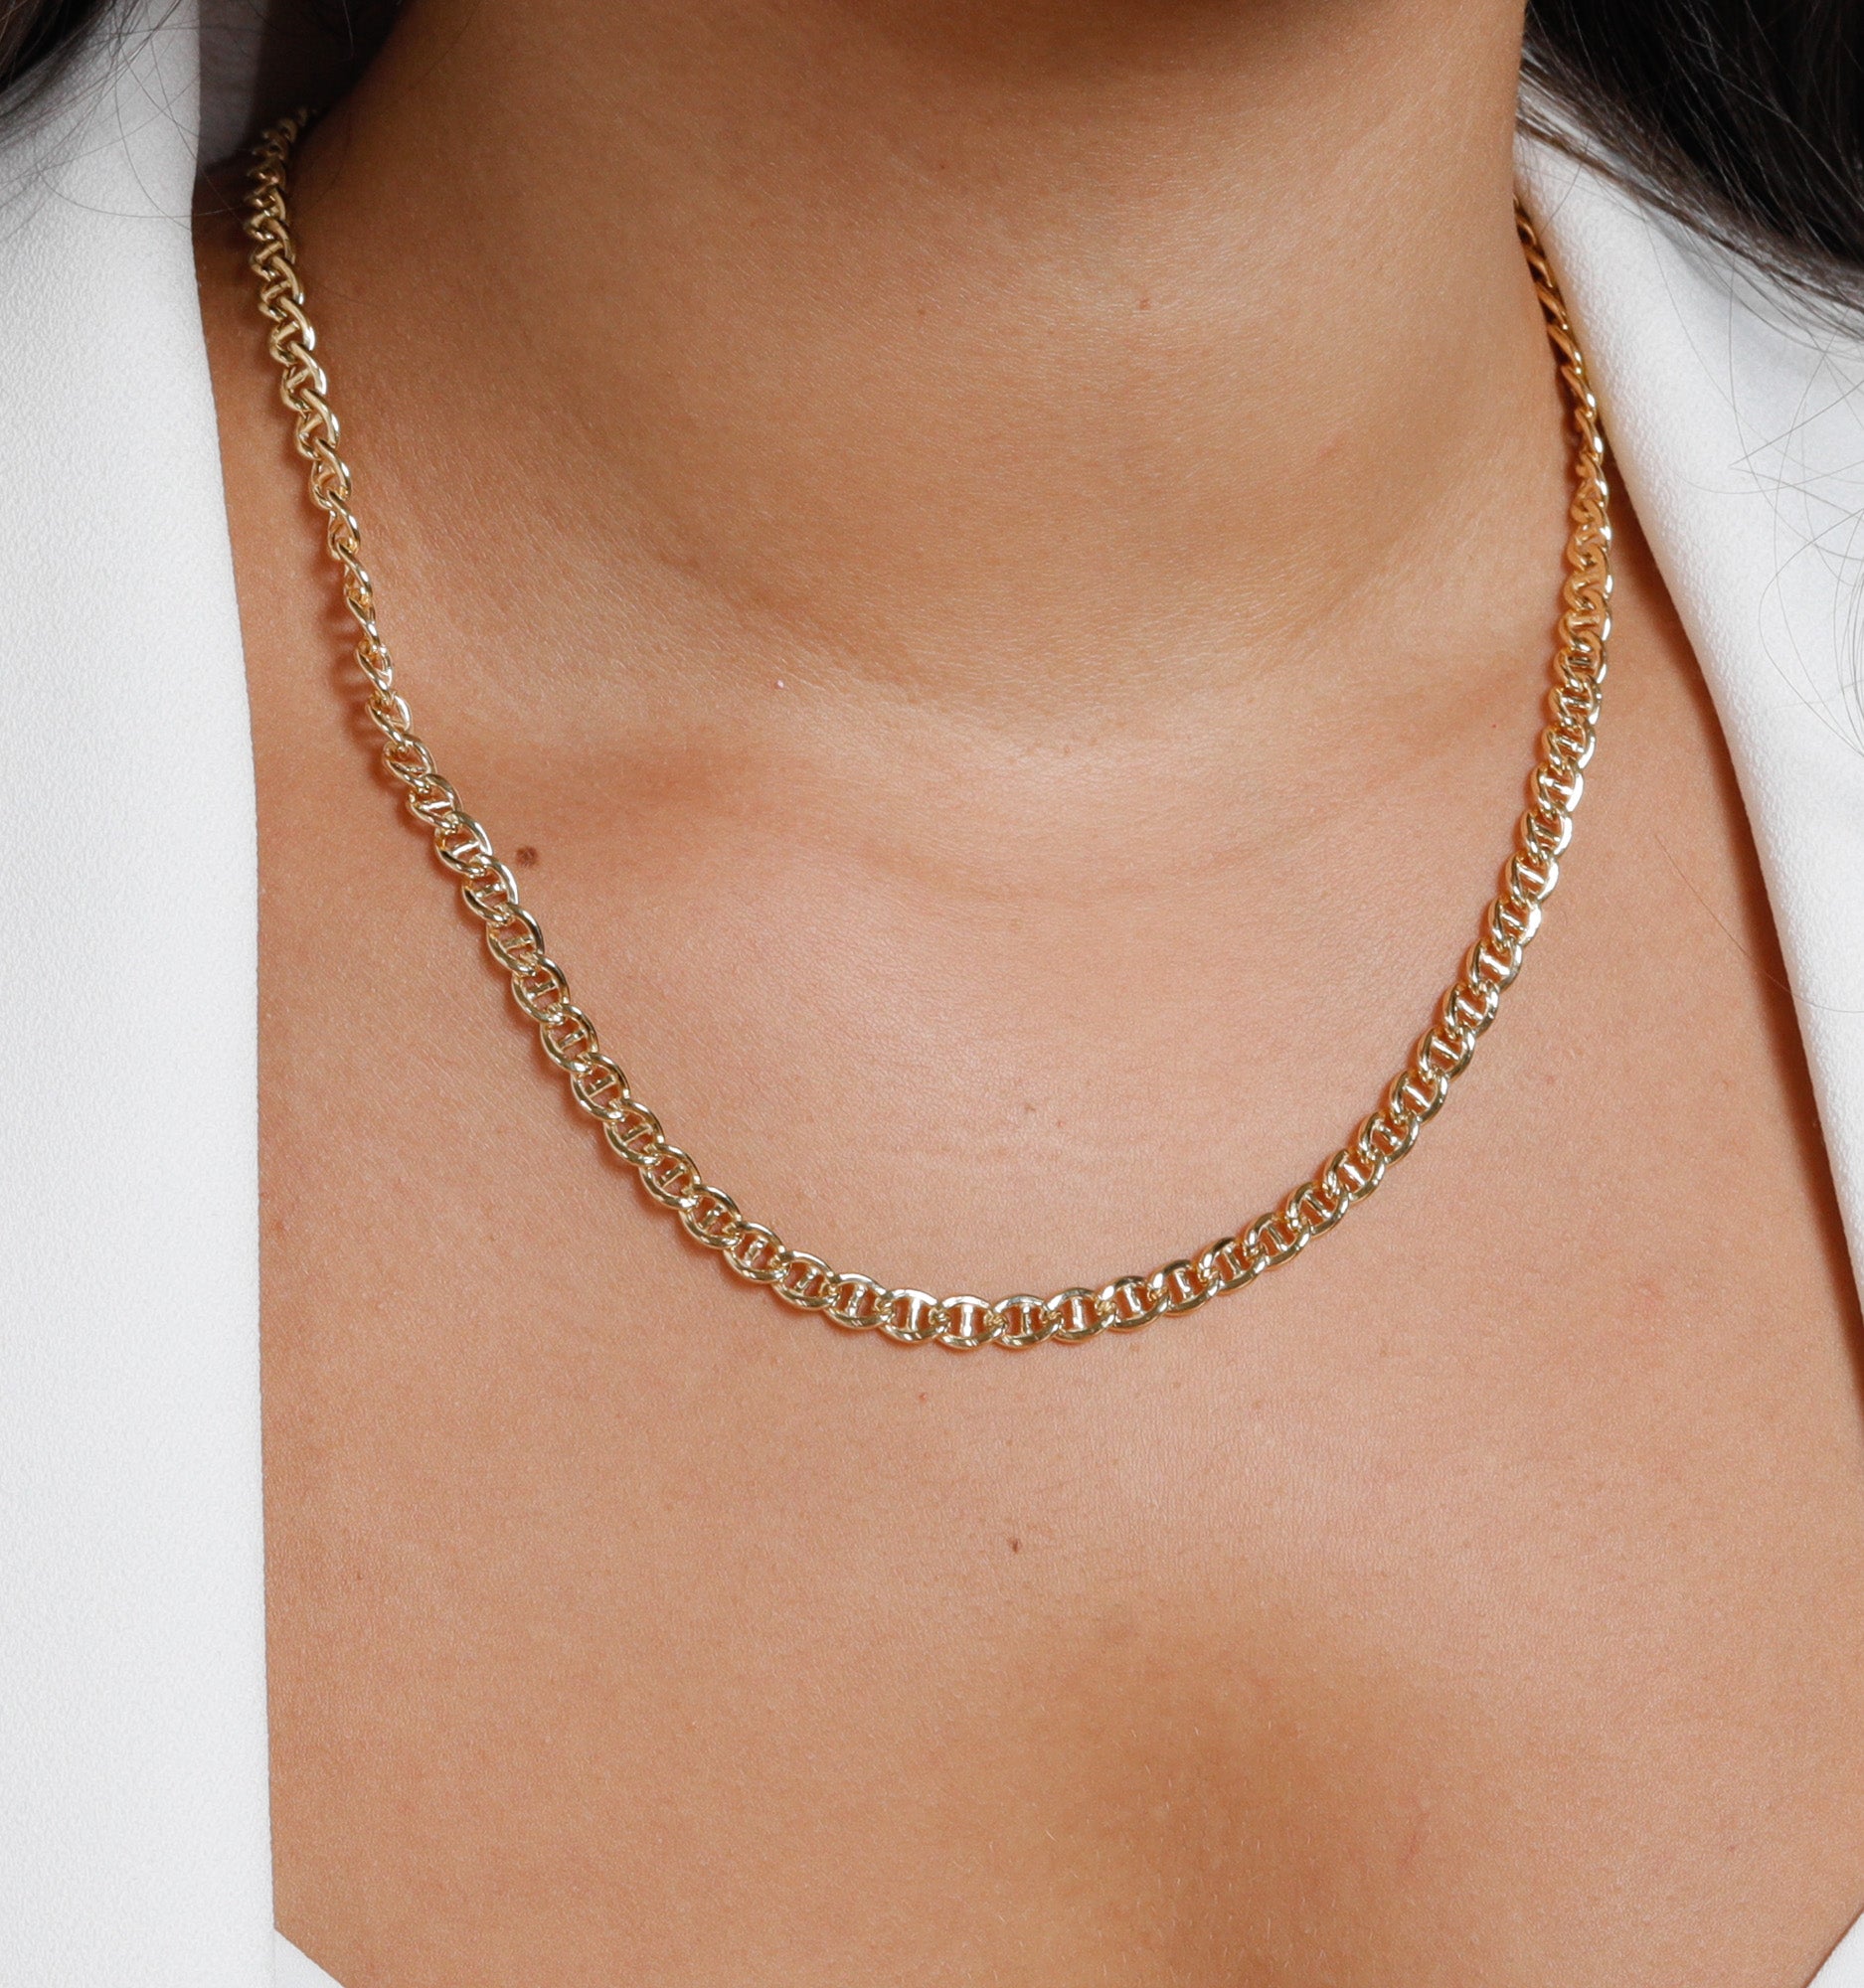 Large Marina Chain In 14K Solid Gold